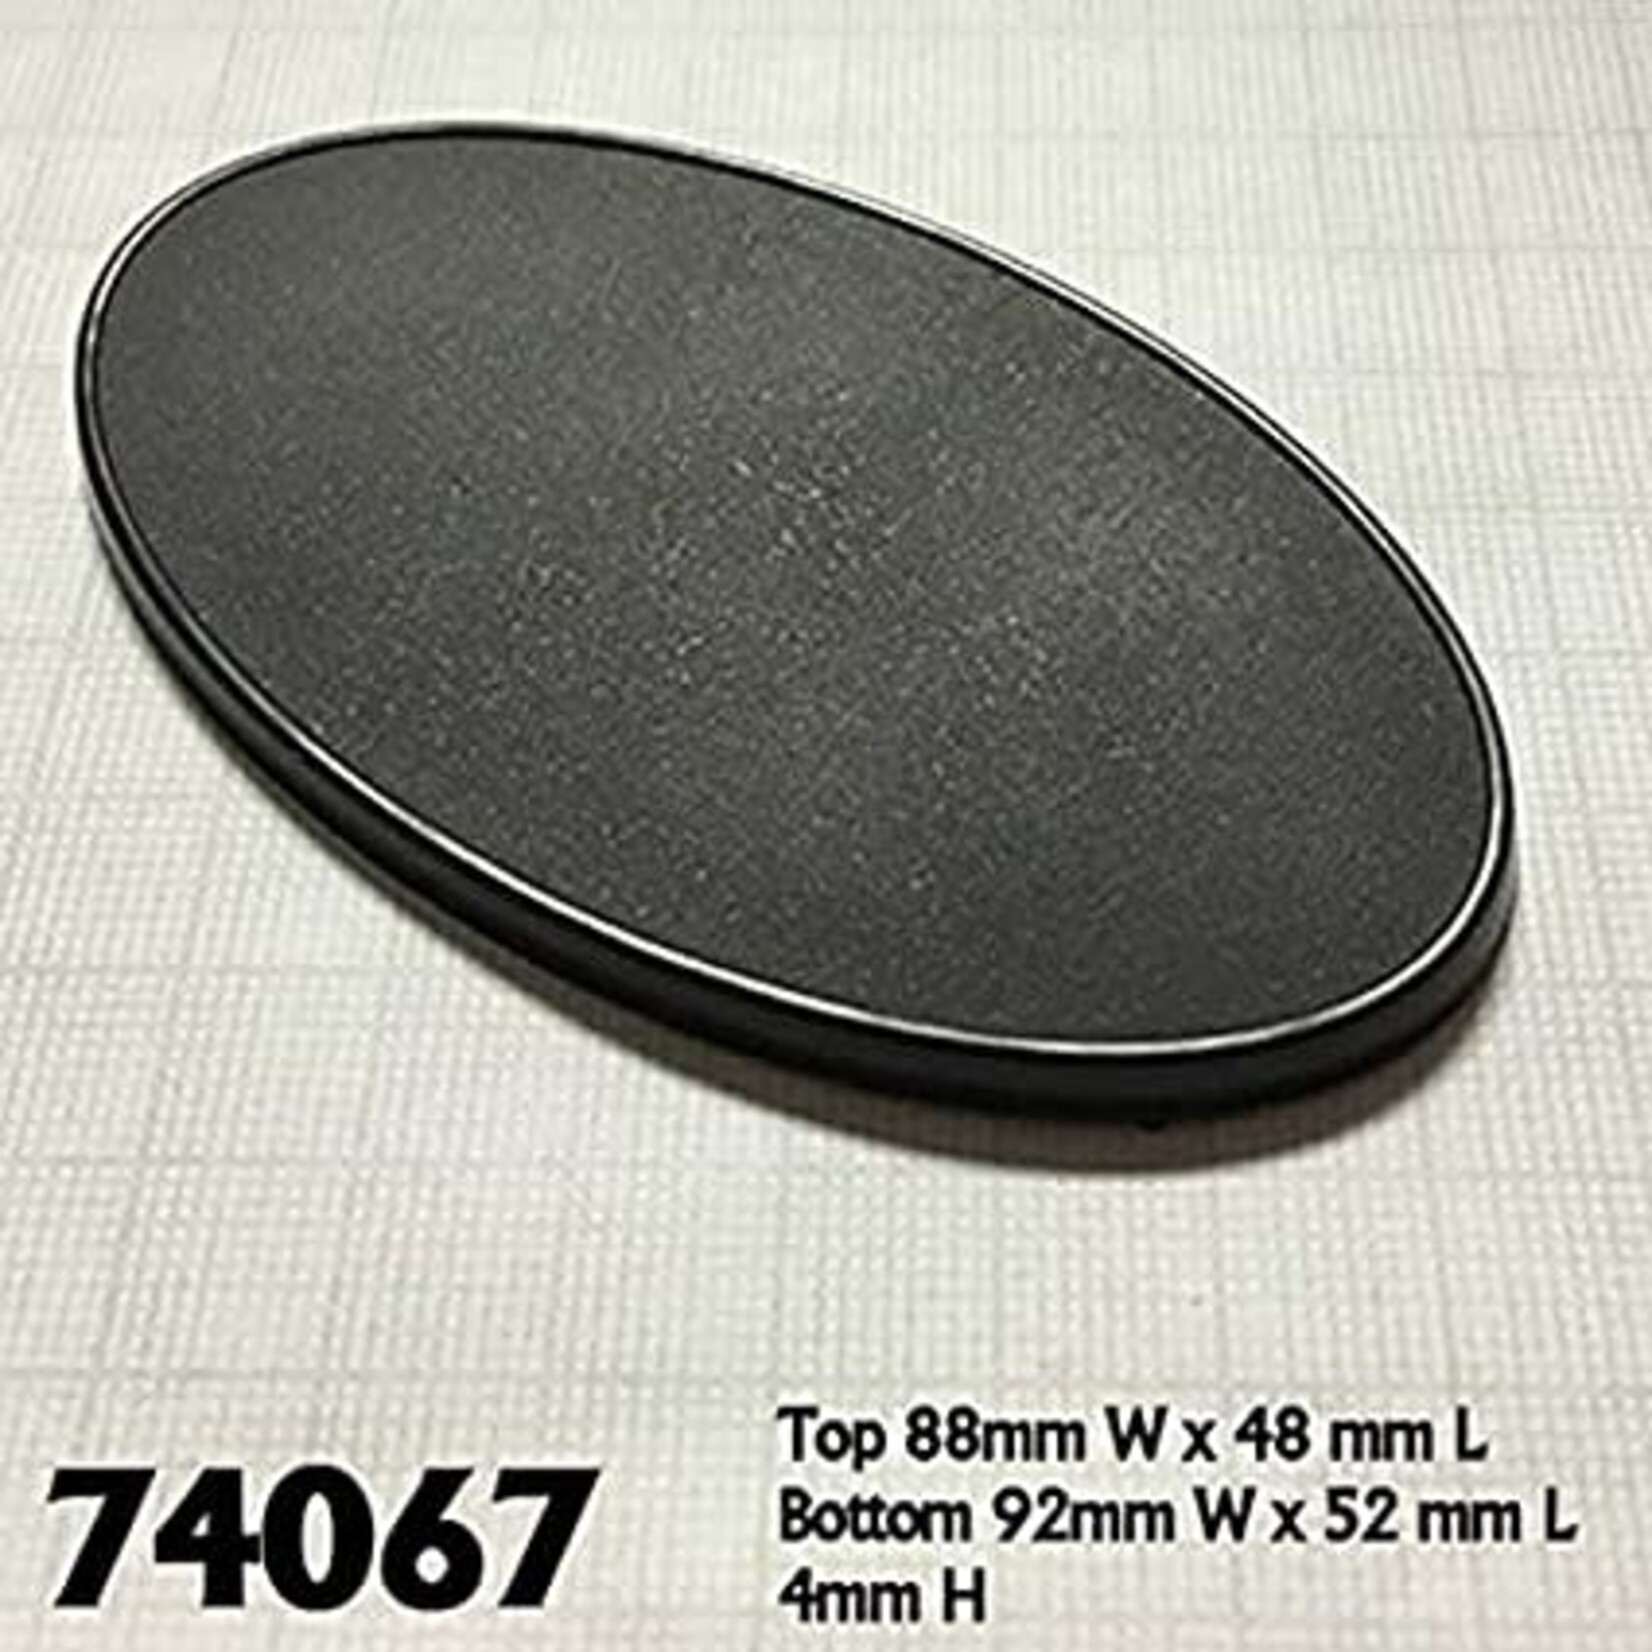 Reaper Miniatures 90mm x 52mm Oval Gaming Base (10)